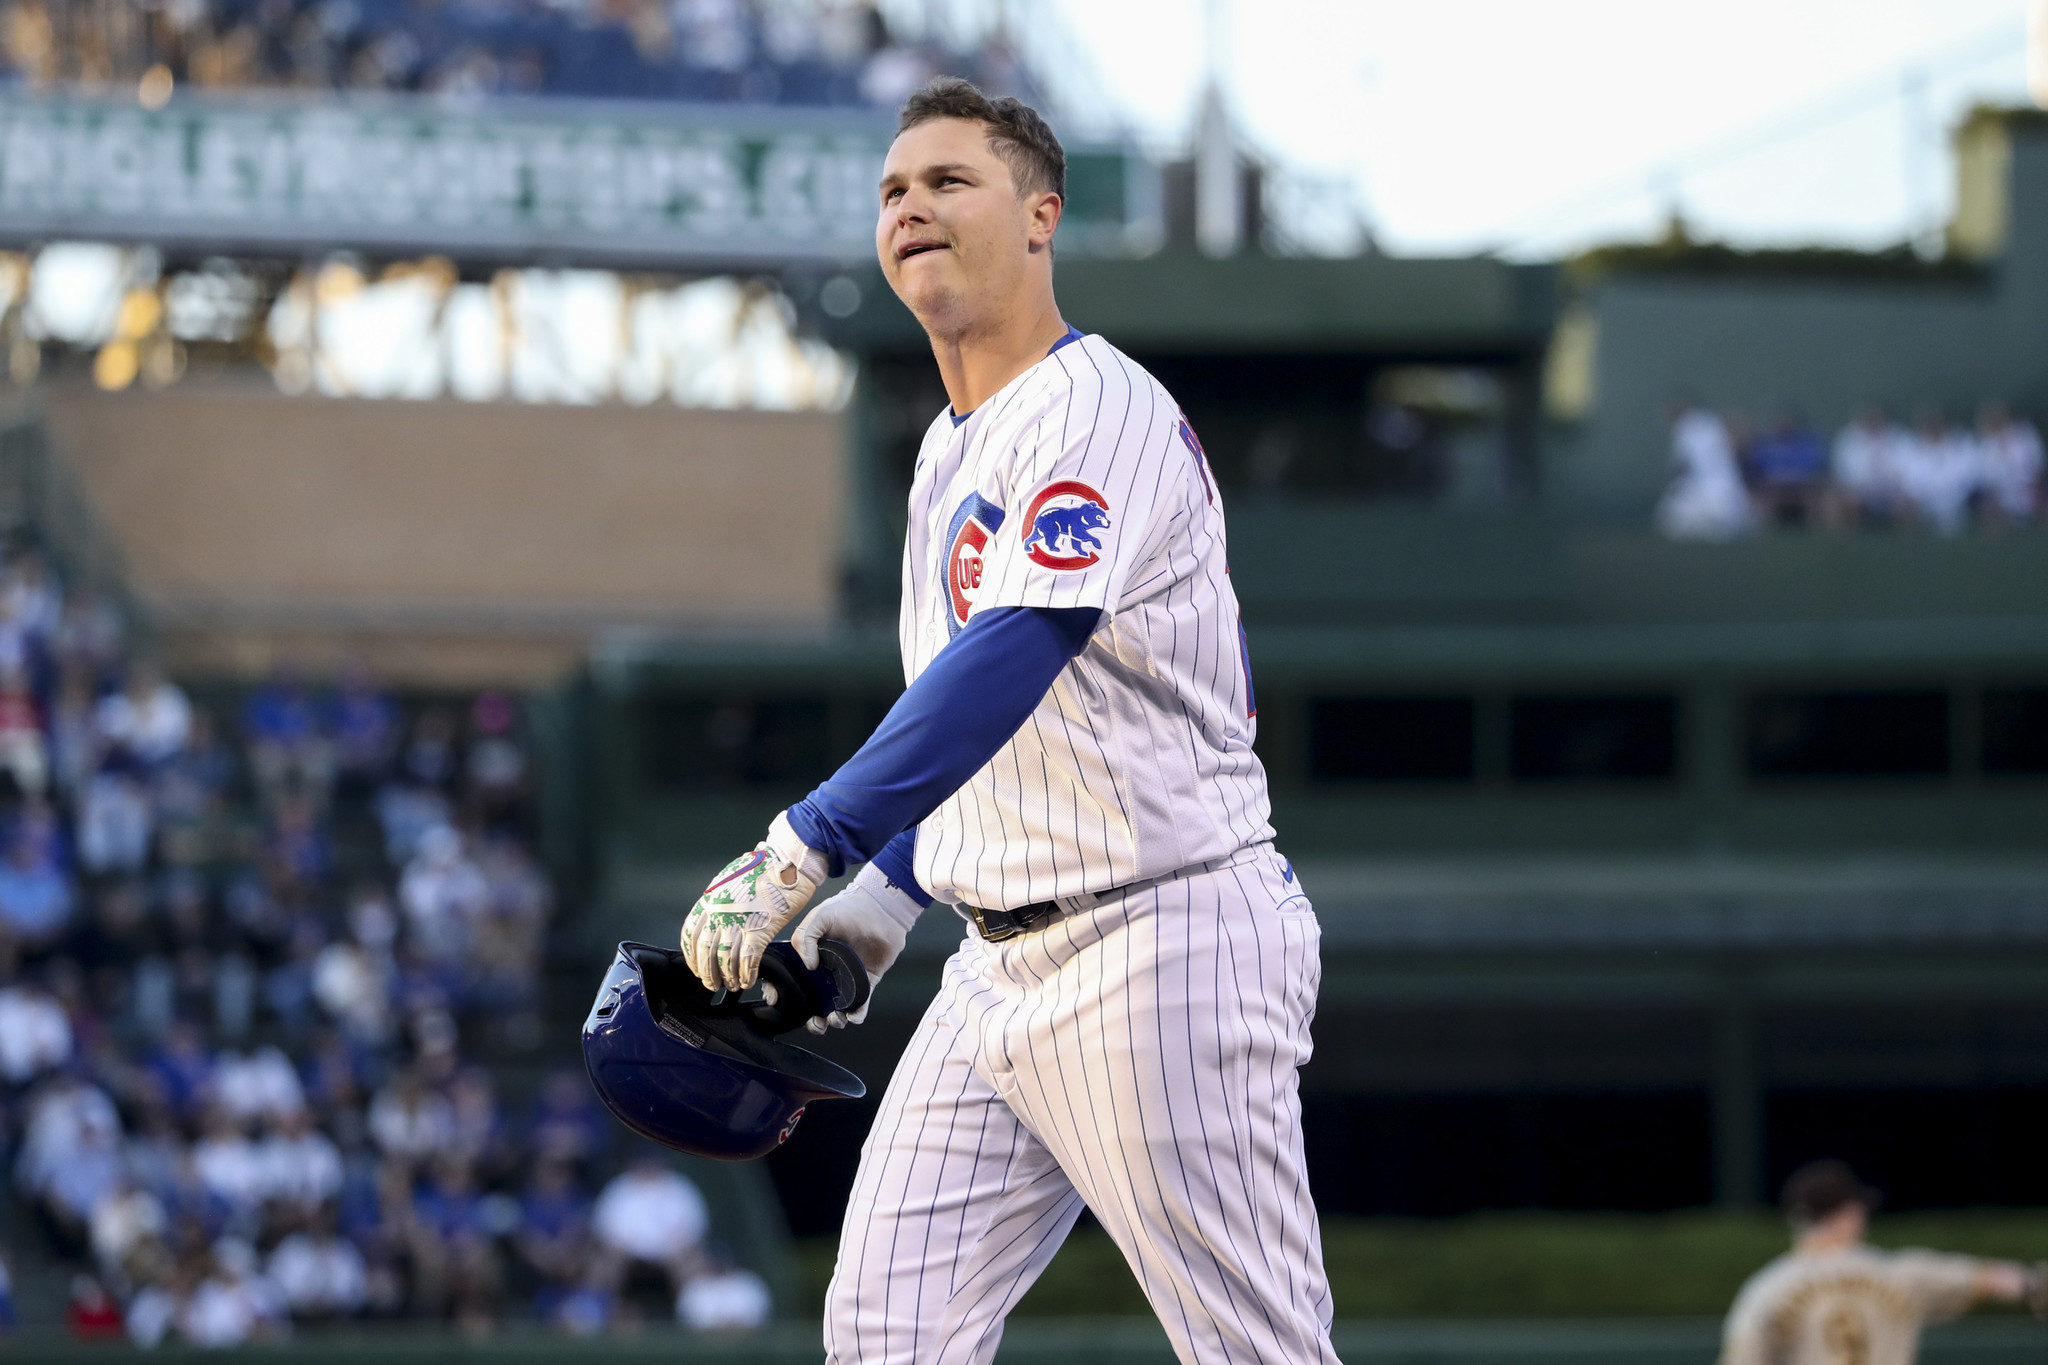 Experience getting to the majors aids Patrick Wisdom's early success in  2021 with the Cubs